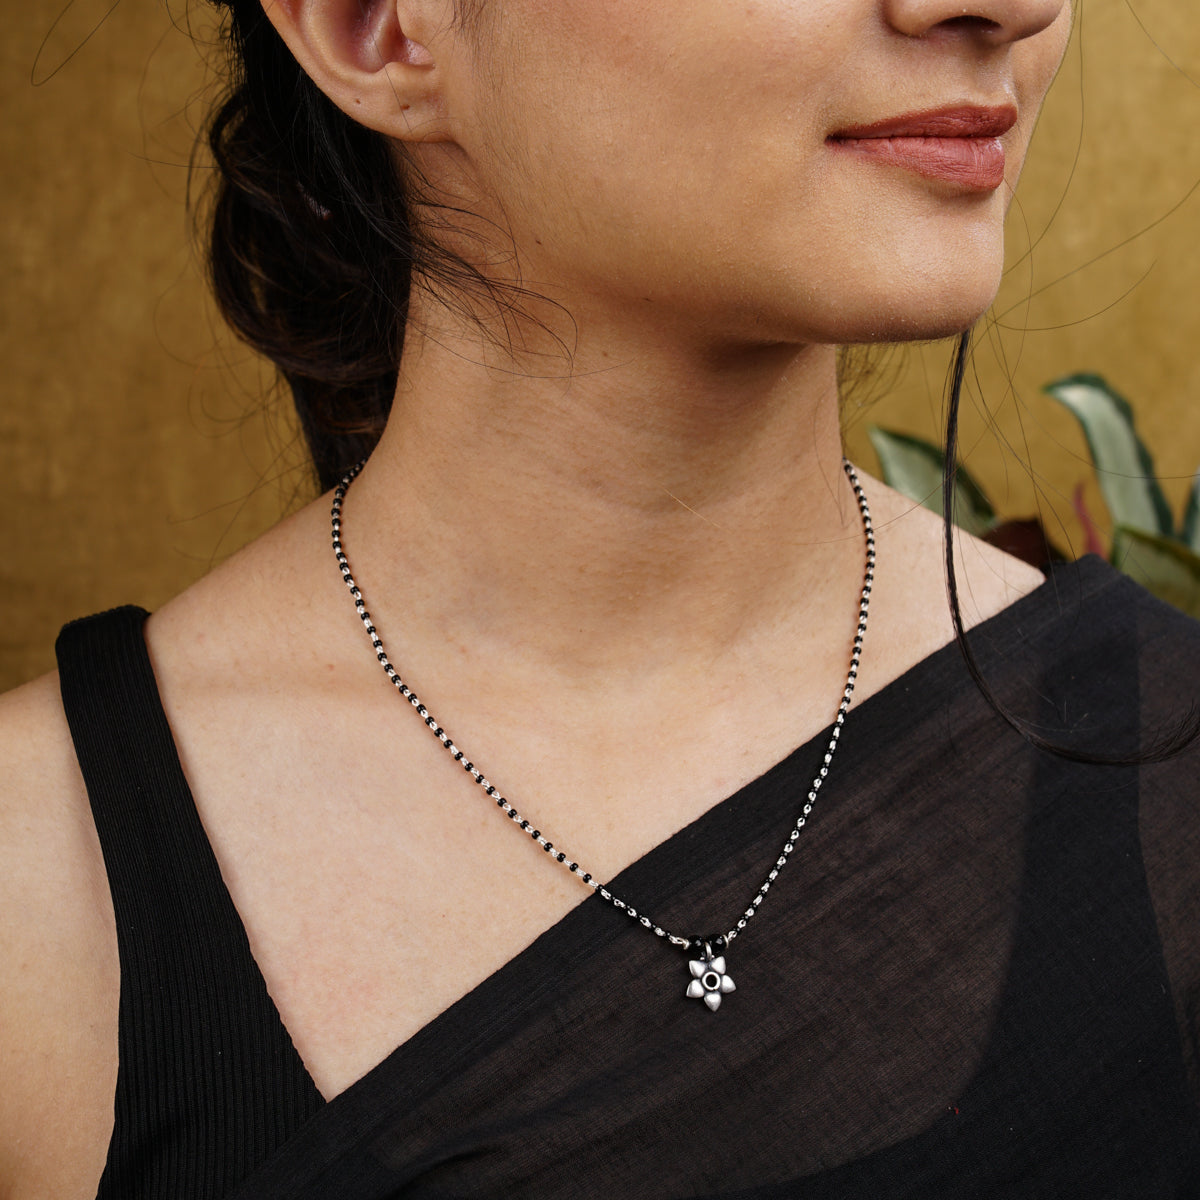 a woman wearing a necklace with a cross on it